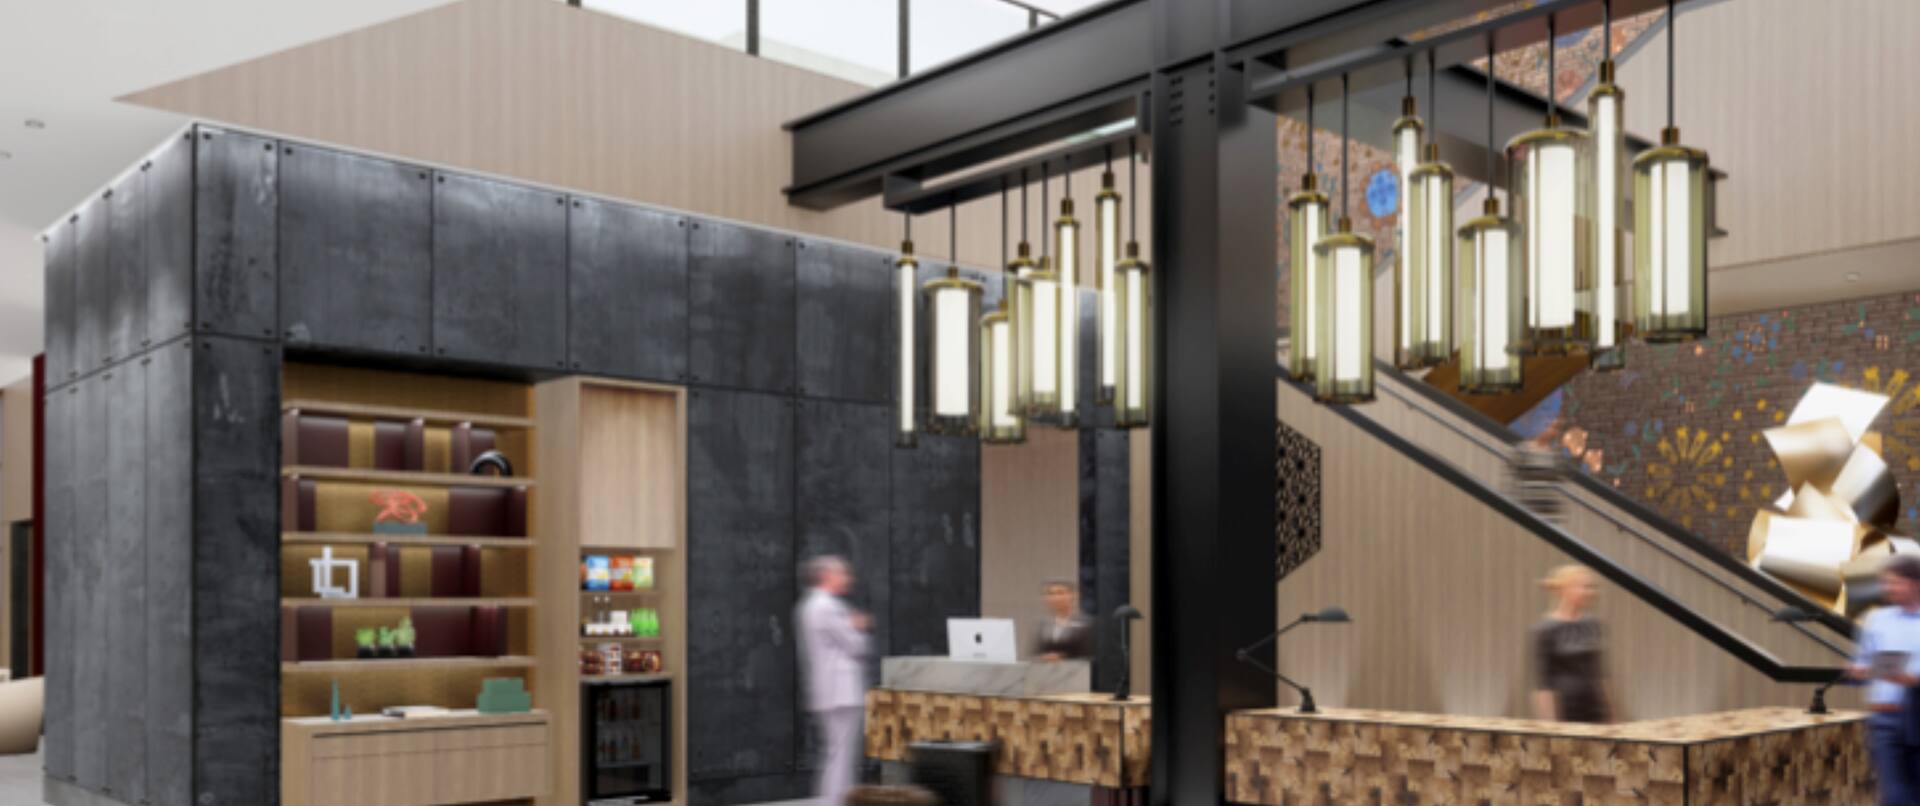 Lobby area with front desk reception and blurred guests